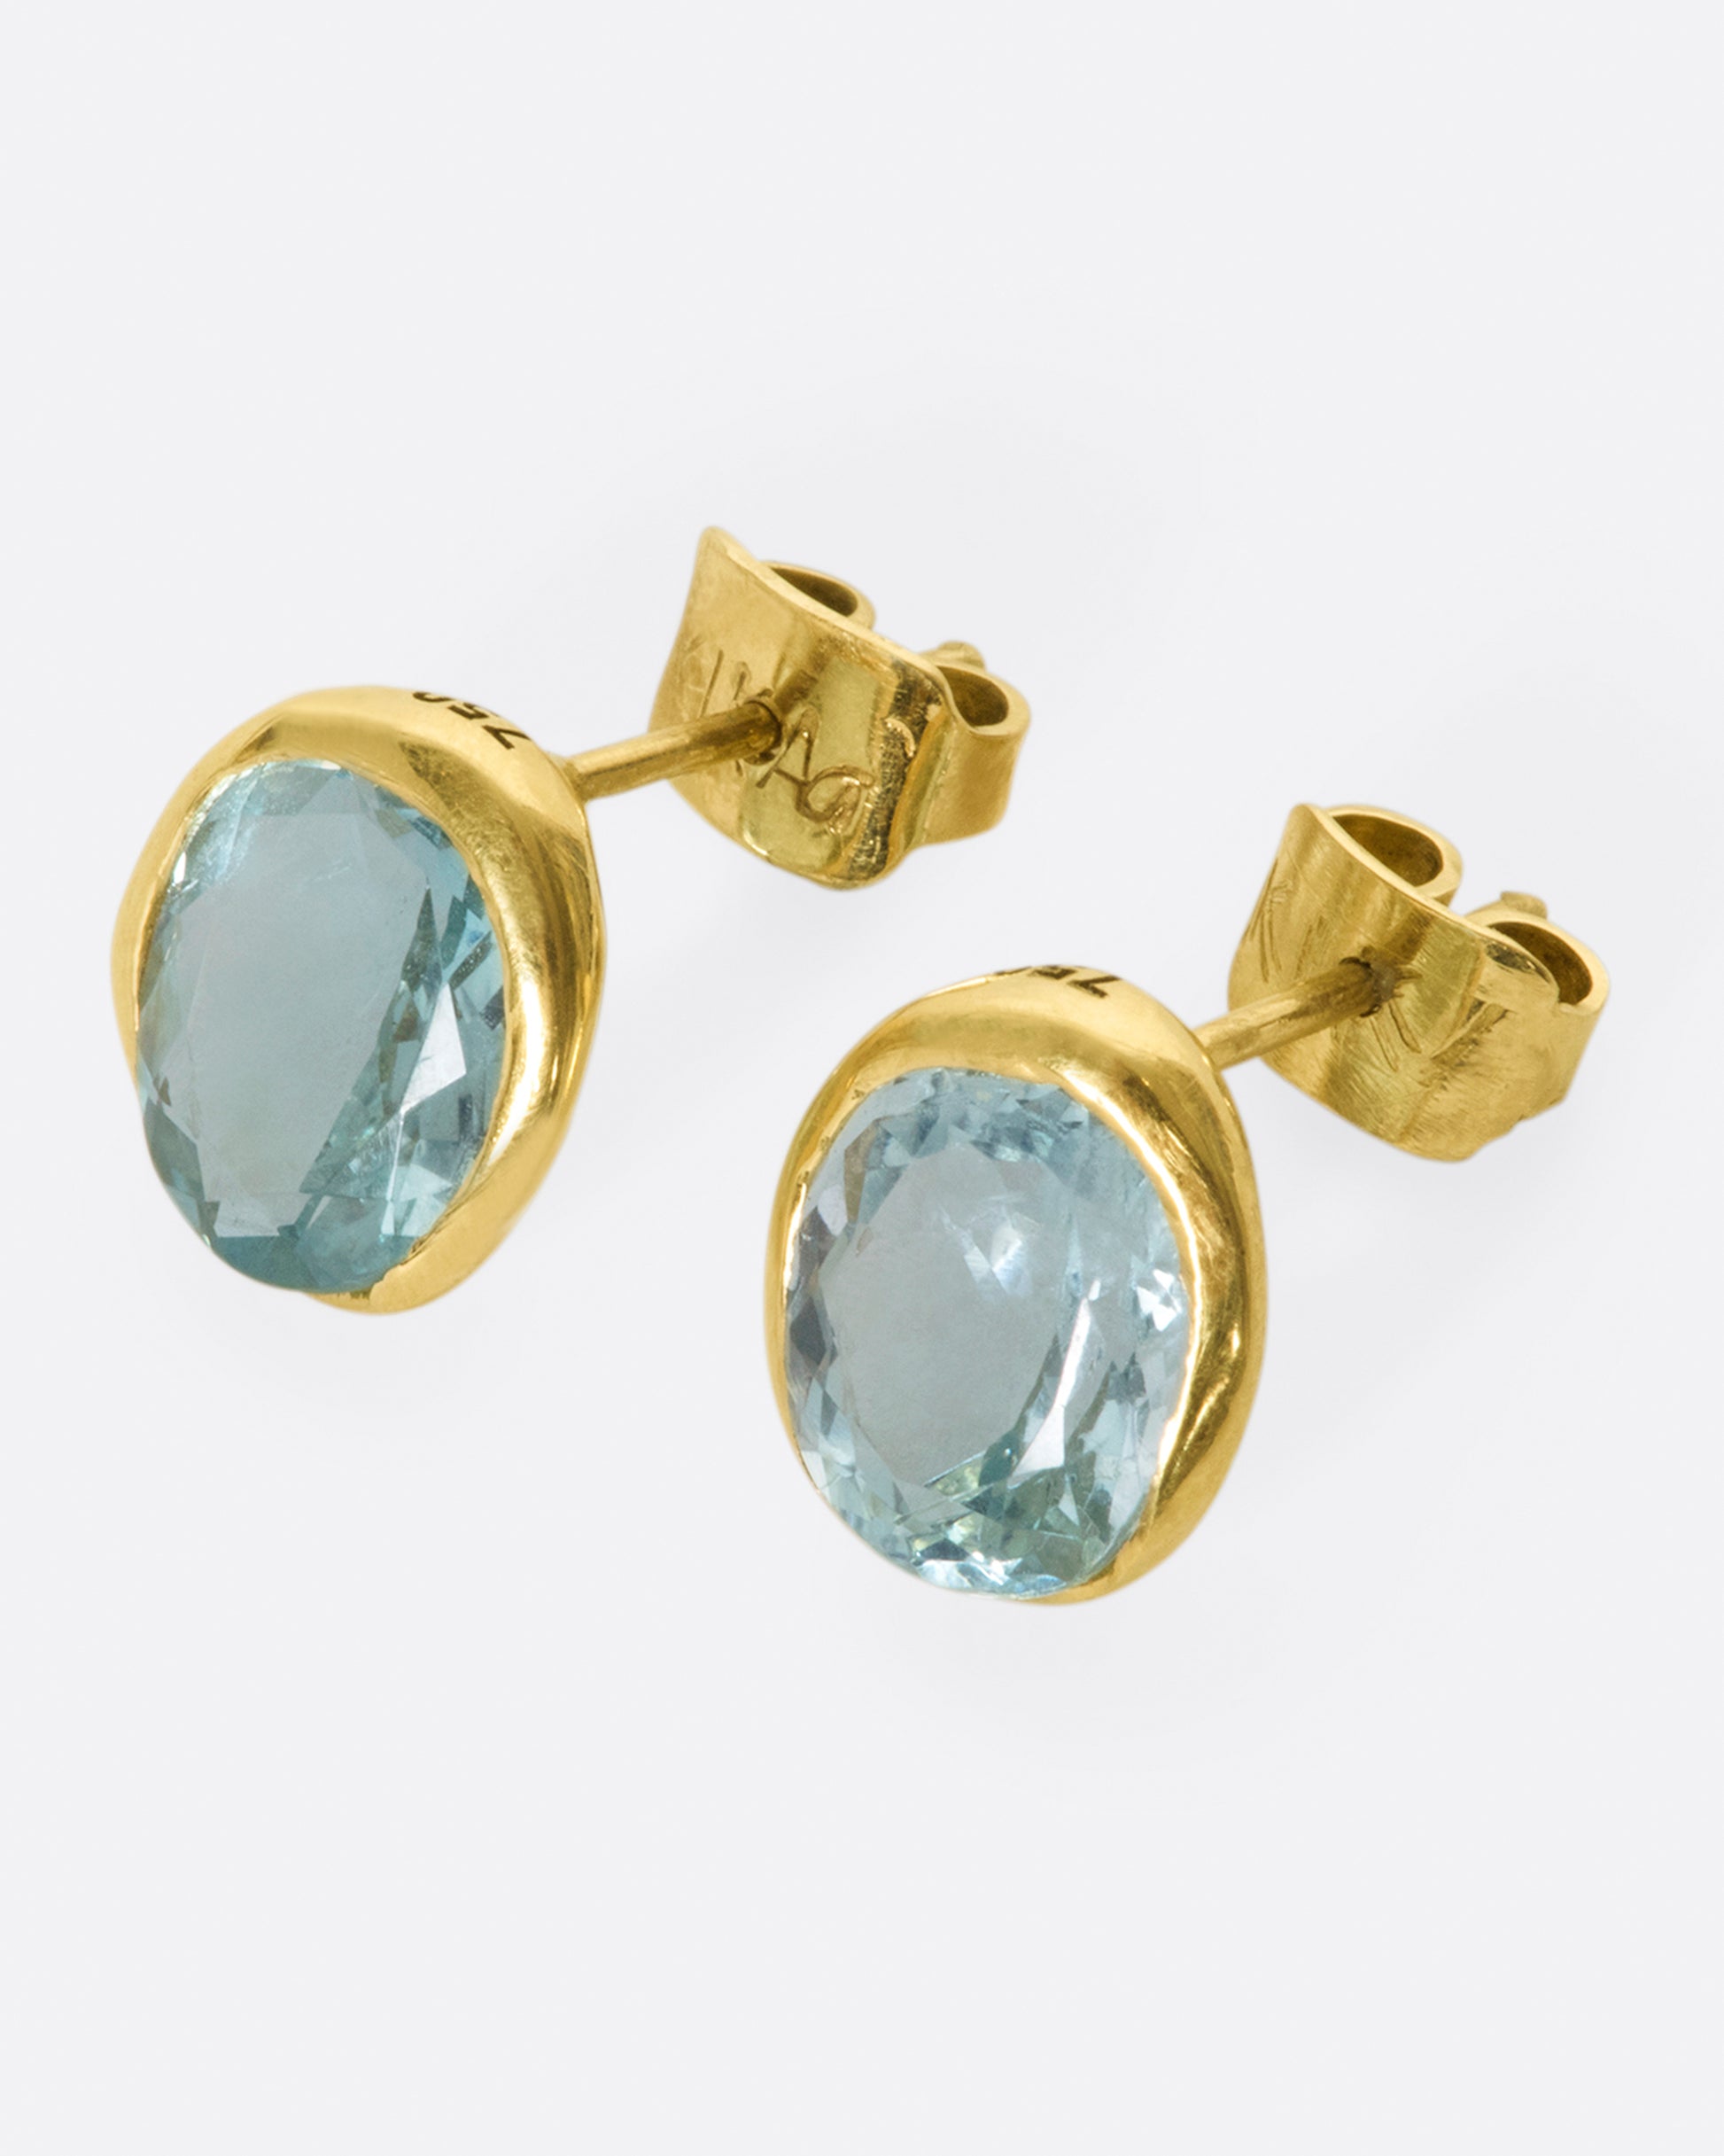 A pair of yellow gold and aquamarine solitaire stud earrings, shown from the side.